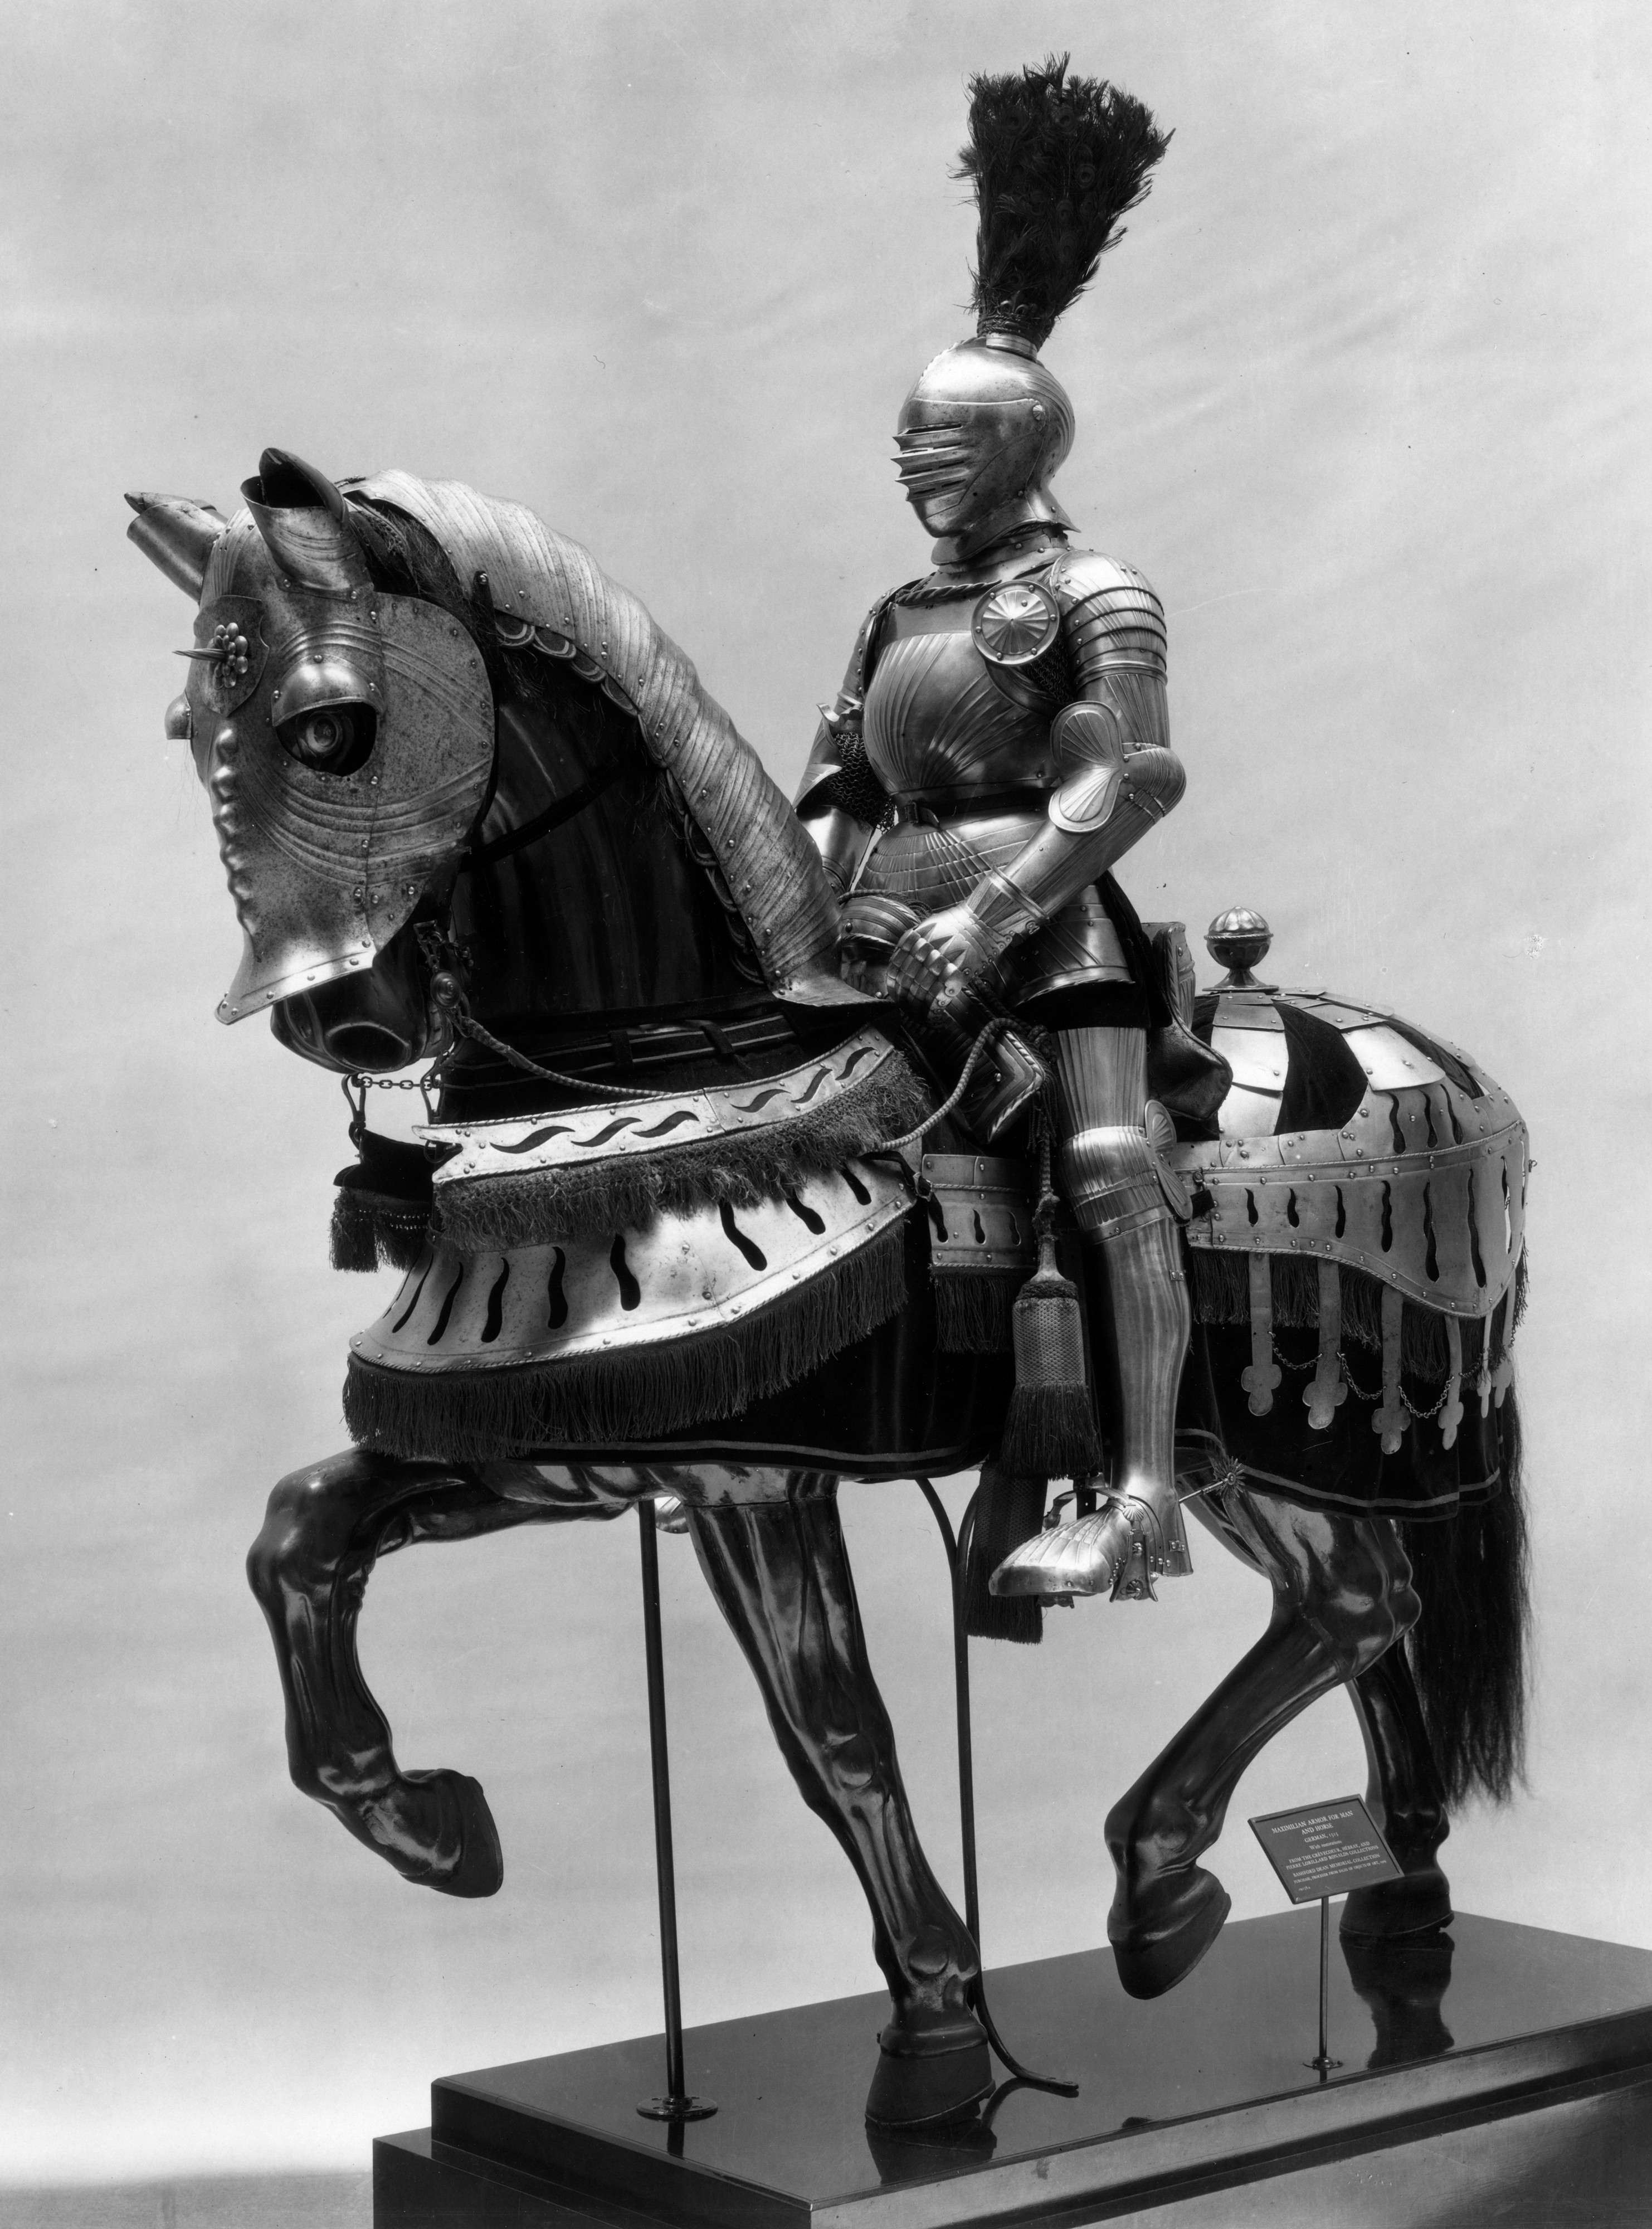 Armor for Man and Horse with Horse Trappings, German